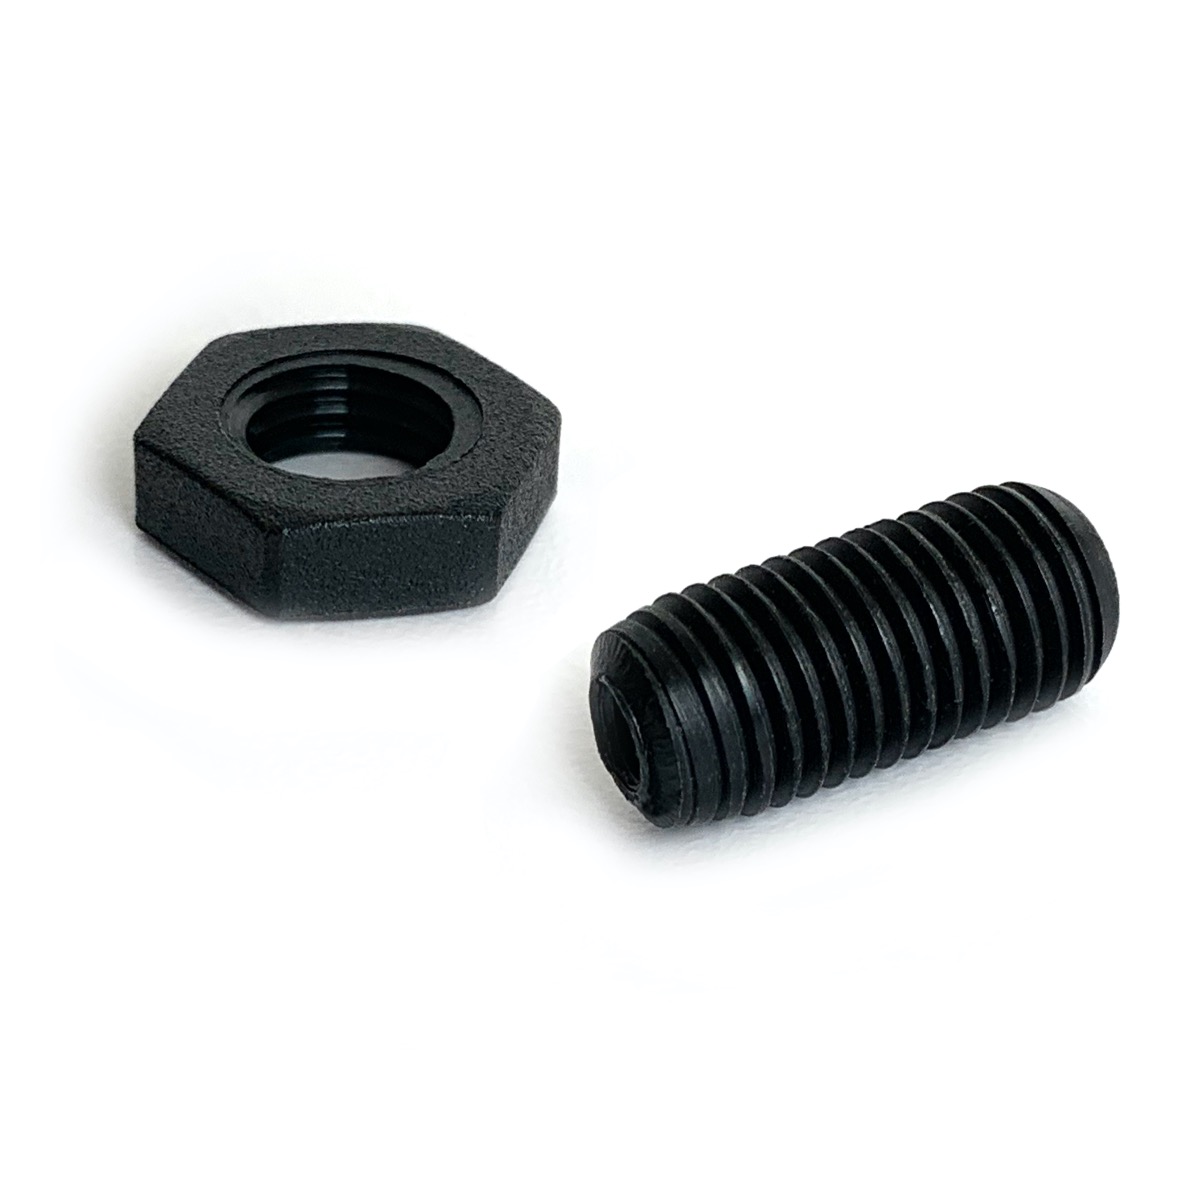 Hex nut and double-threaded screw